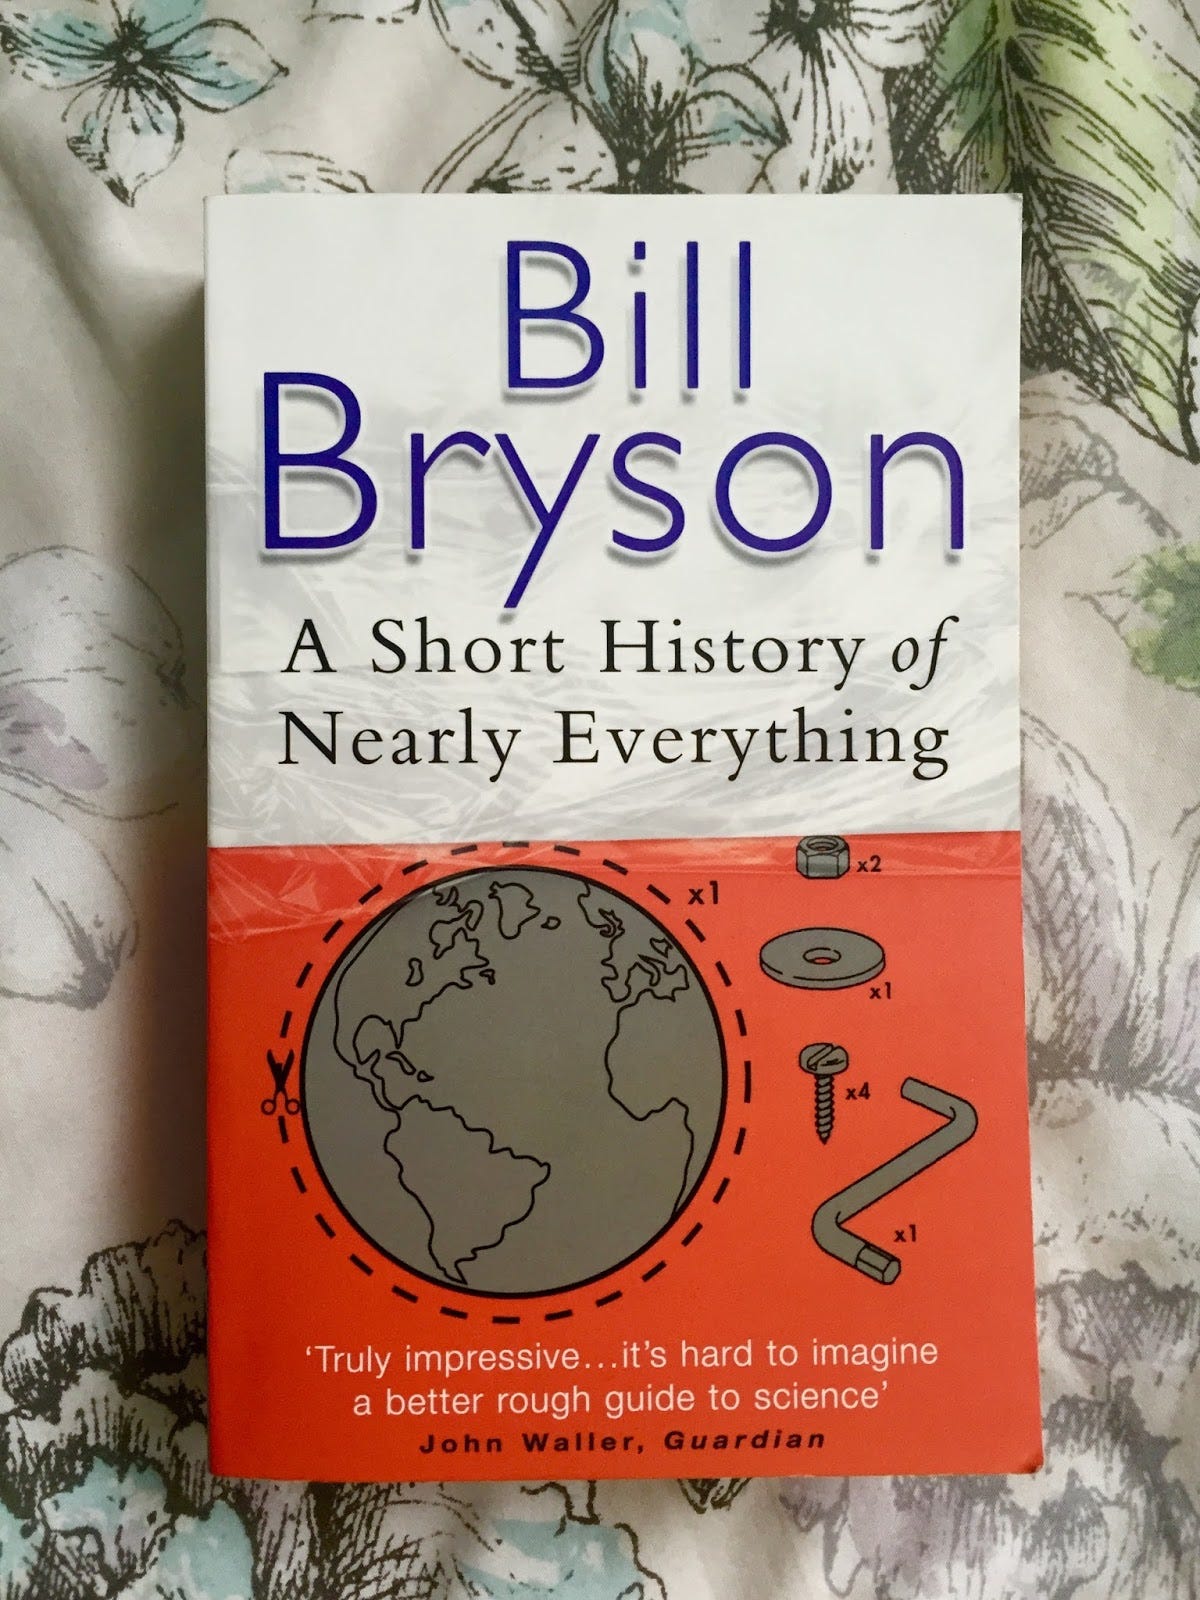 From Mini to Many “A Short History of Everything”-By Bill Bryson | by Mark  | The Insider Tales | Medium